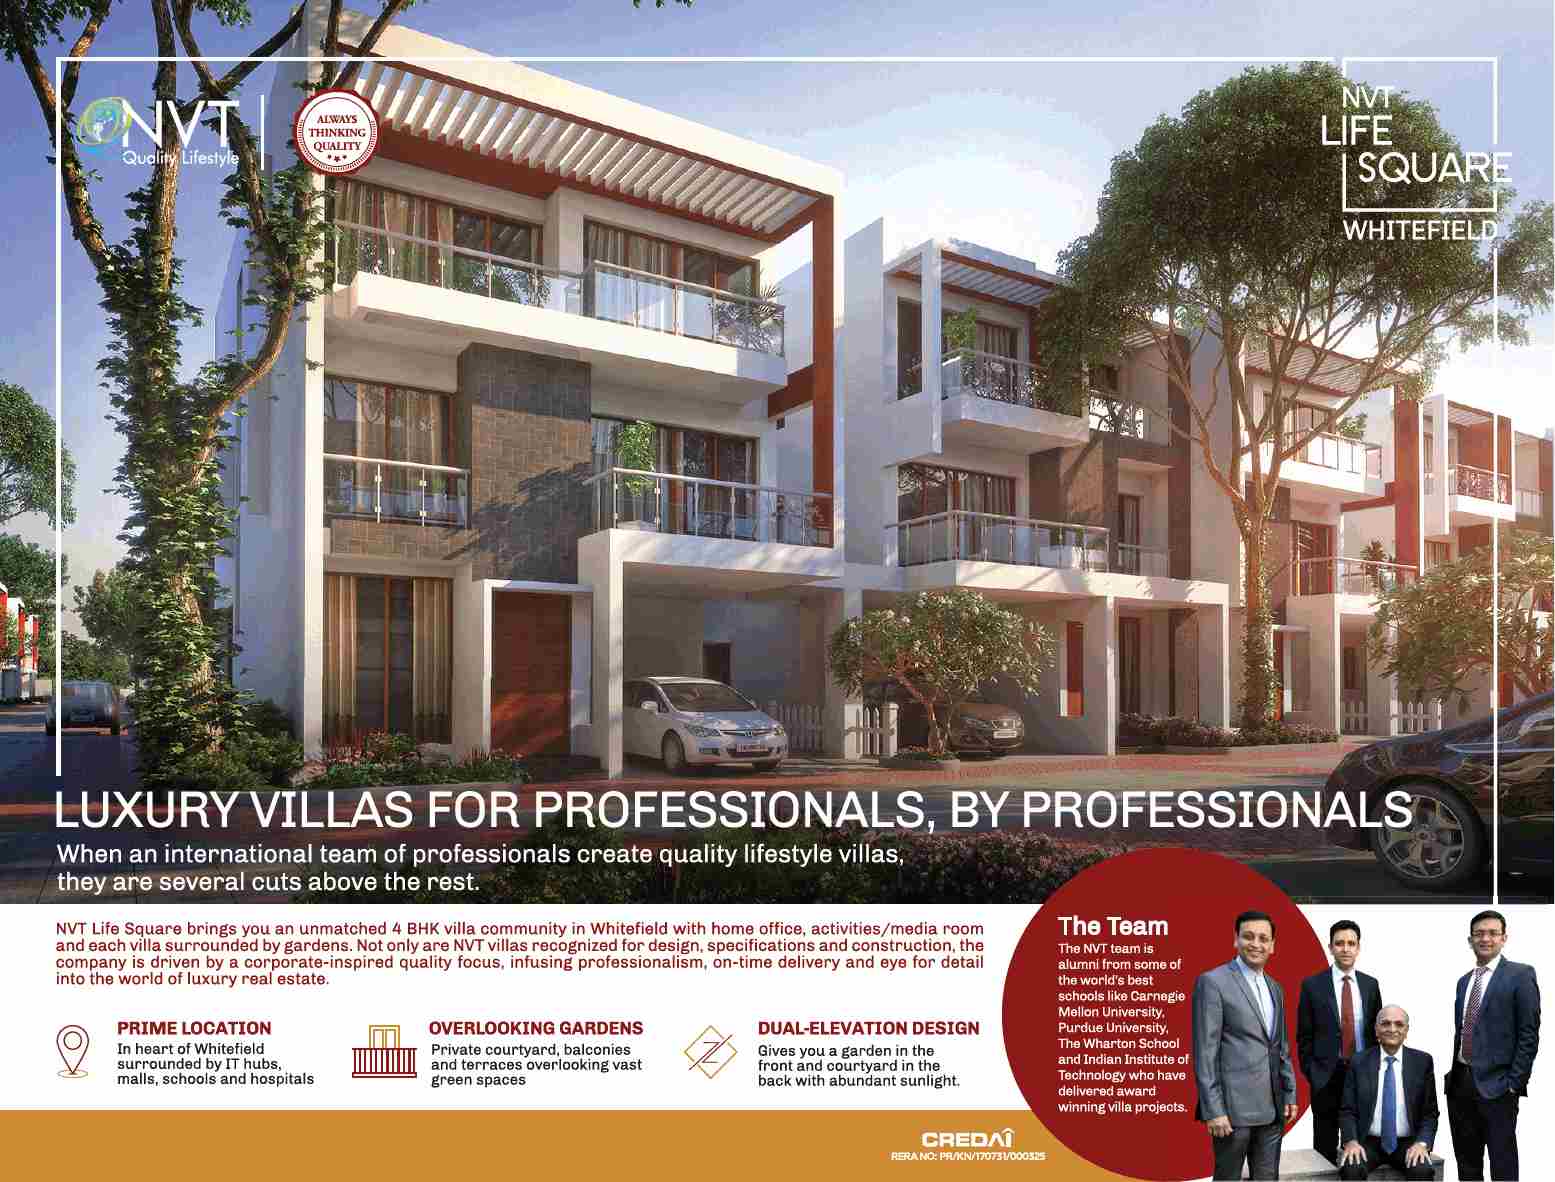 Reside in an unmatched 4 BHK villa community at NVT Life Square in Bangalore Update